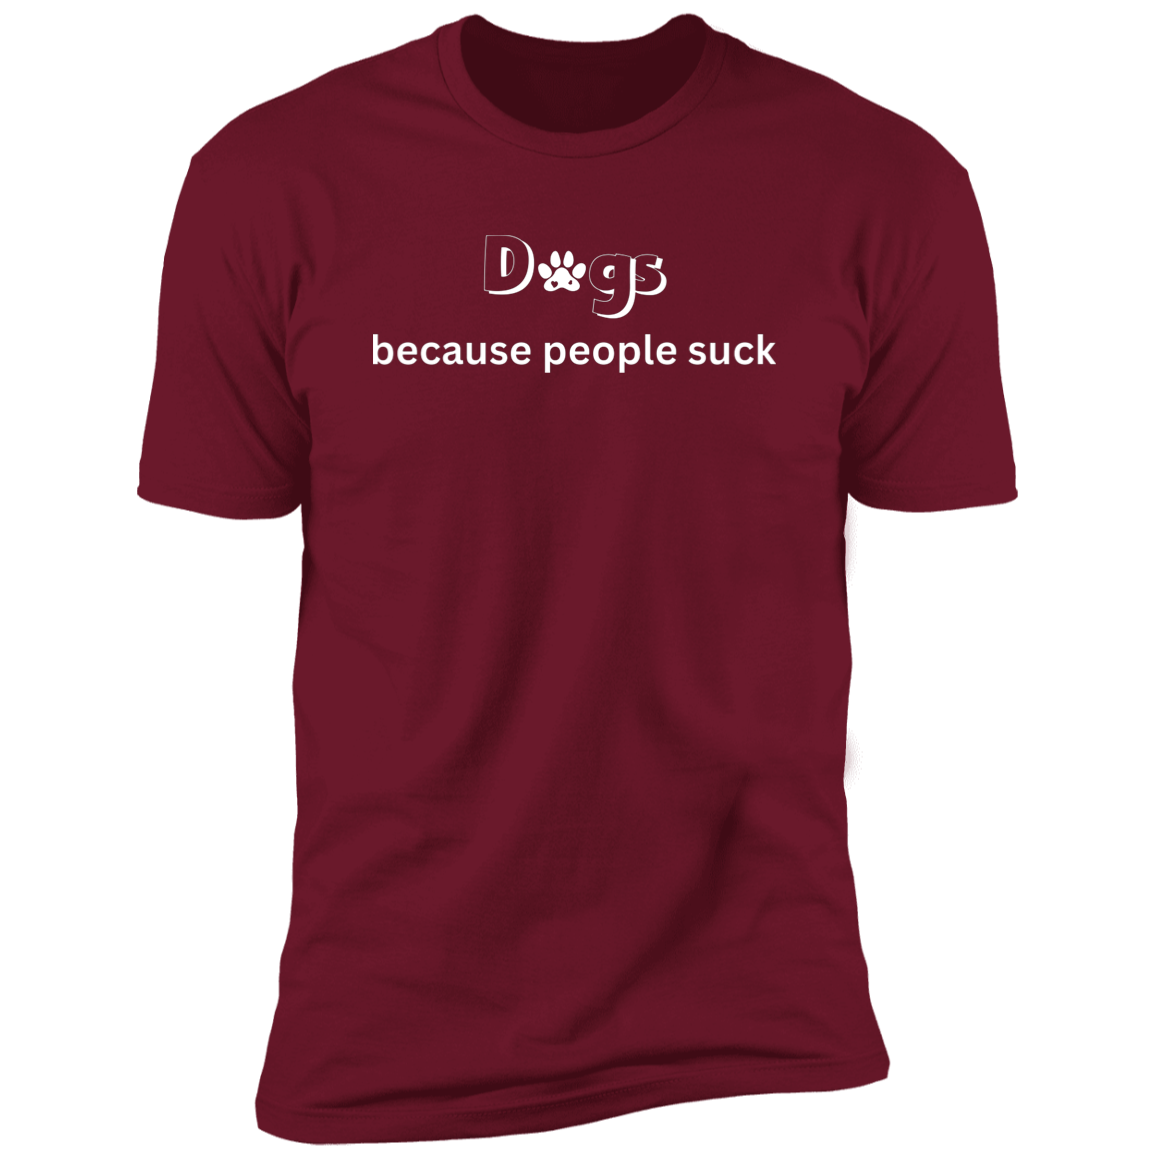 Dogs Because People Such t-shirt, funny dog shirt for humans, in cardinal red